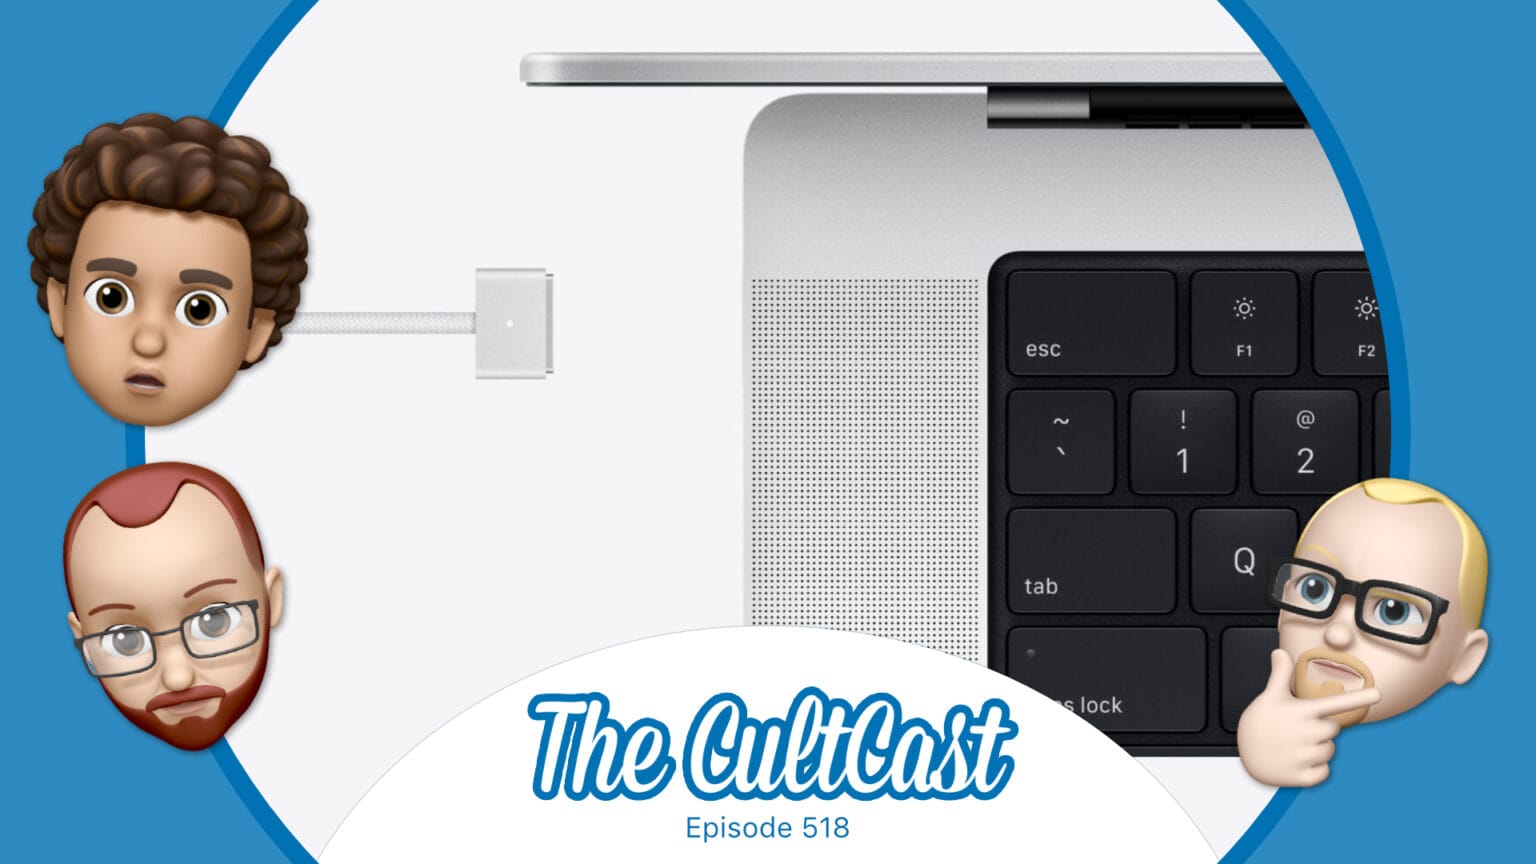 The CultCast Apple podcast: The new MacBook Pro's MagSafe might just be too strong!